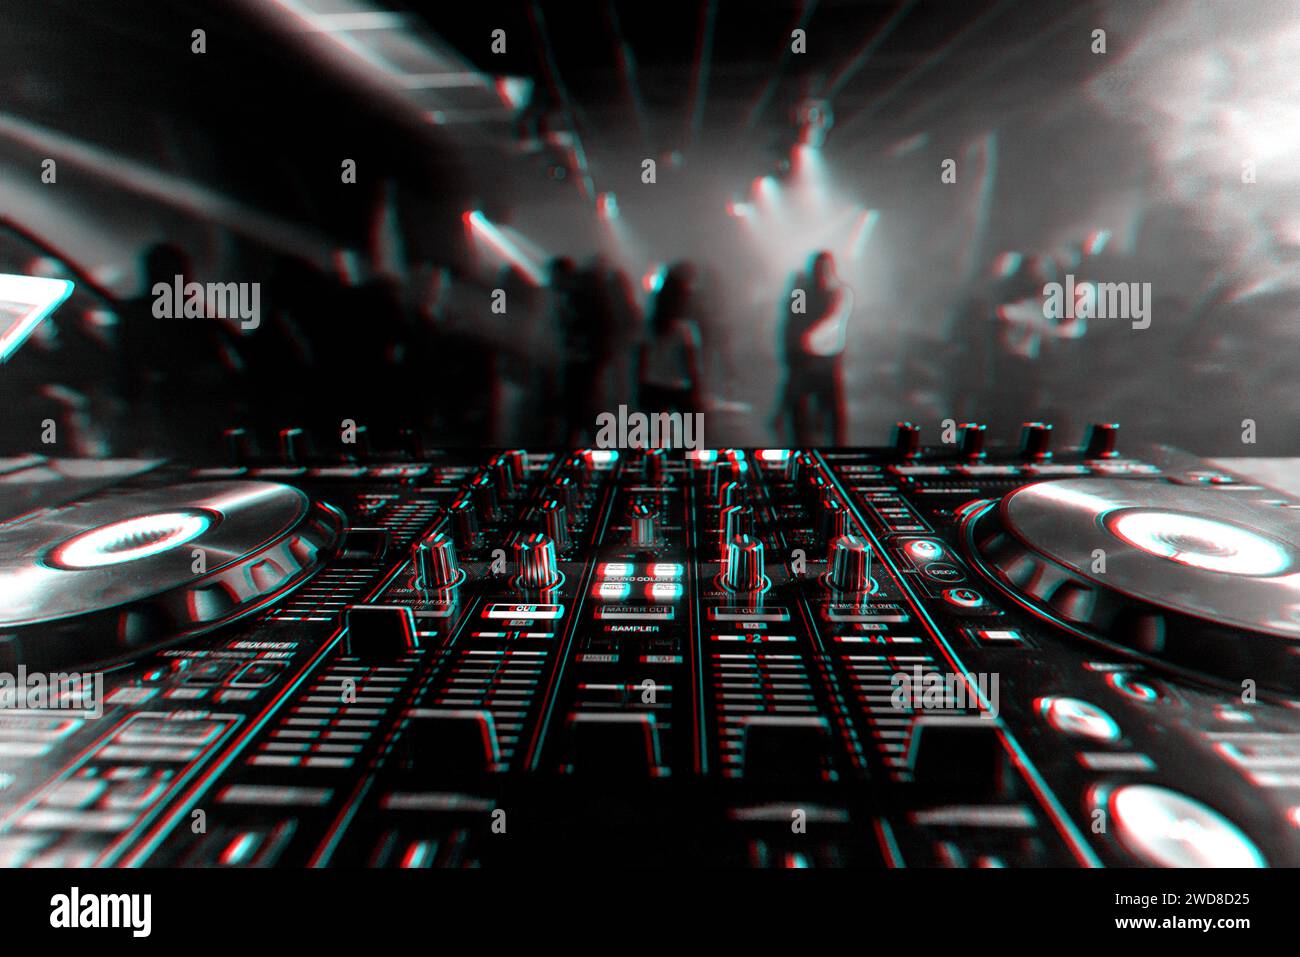 professional DJ mixer controller for mixing music in a nightclub with dancing people on the dance floor. Black and white photo with glitch effect and Stock Photo